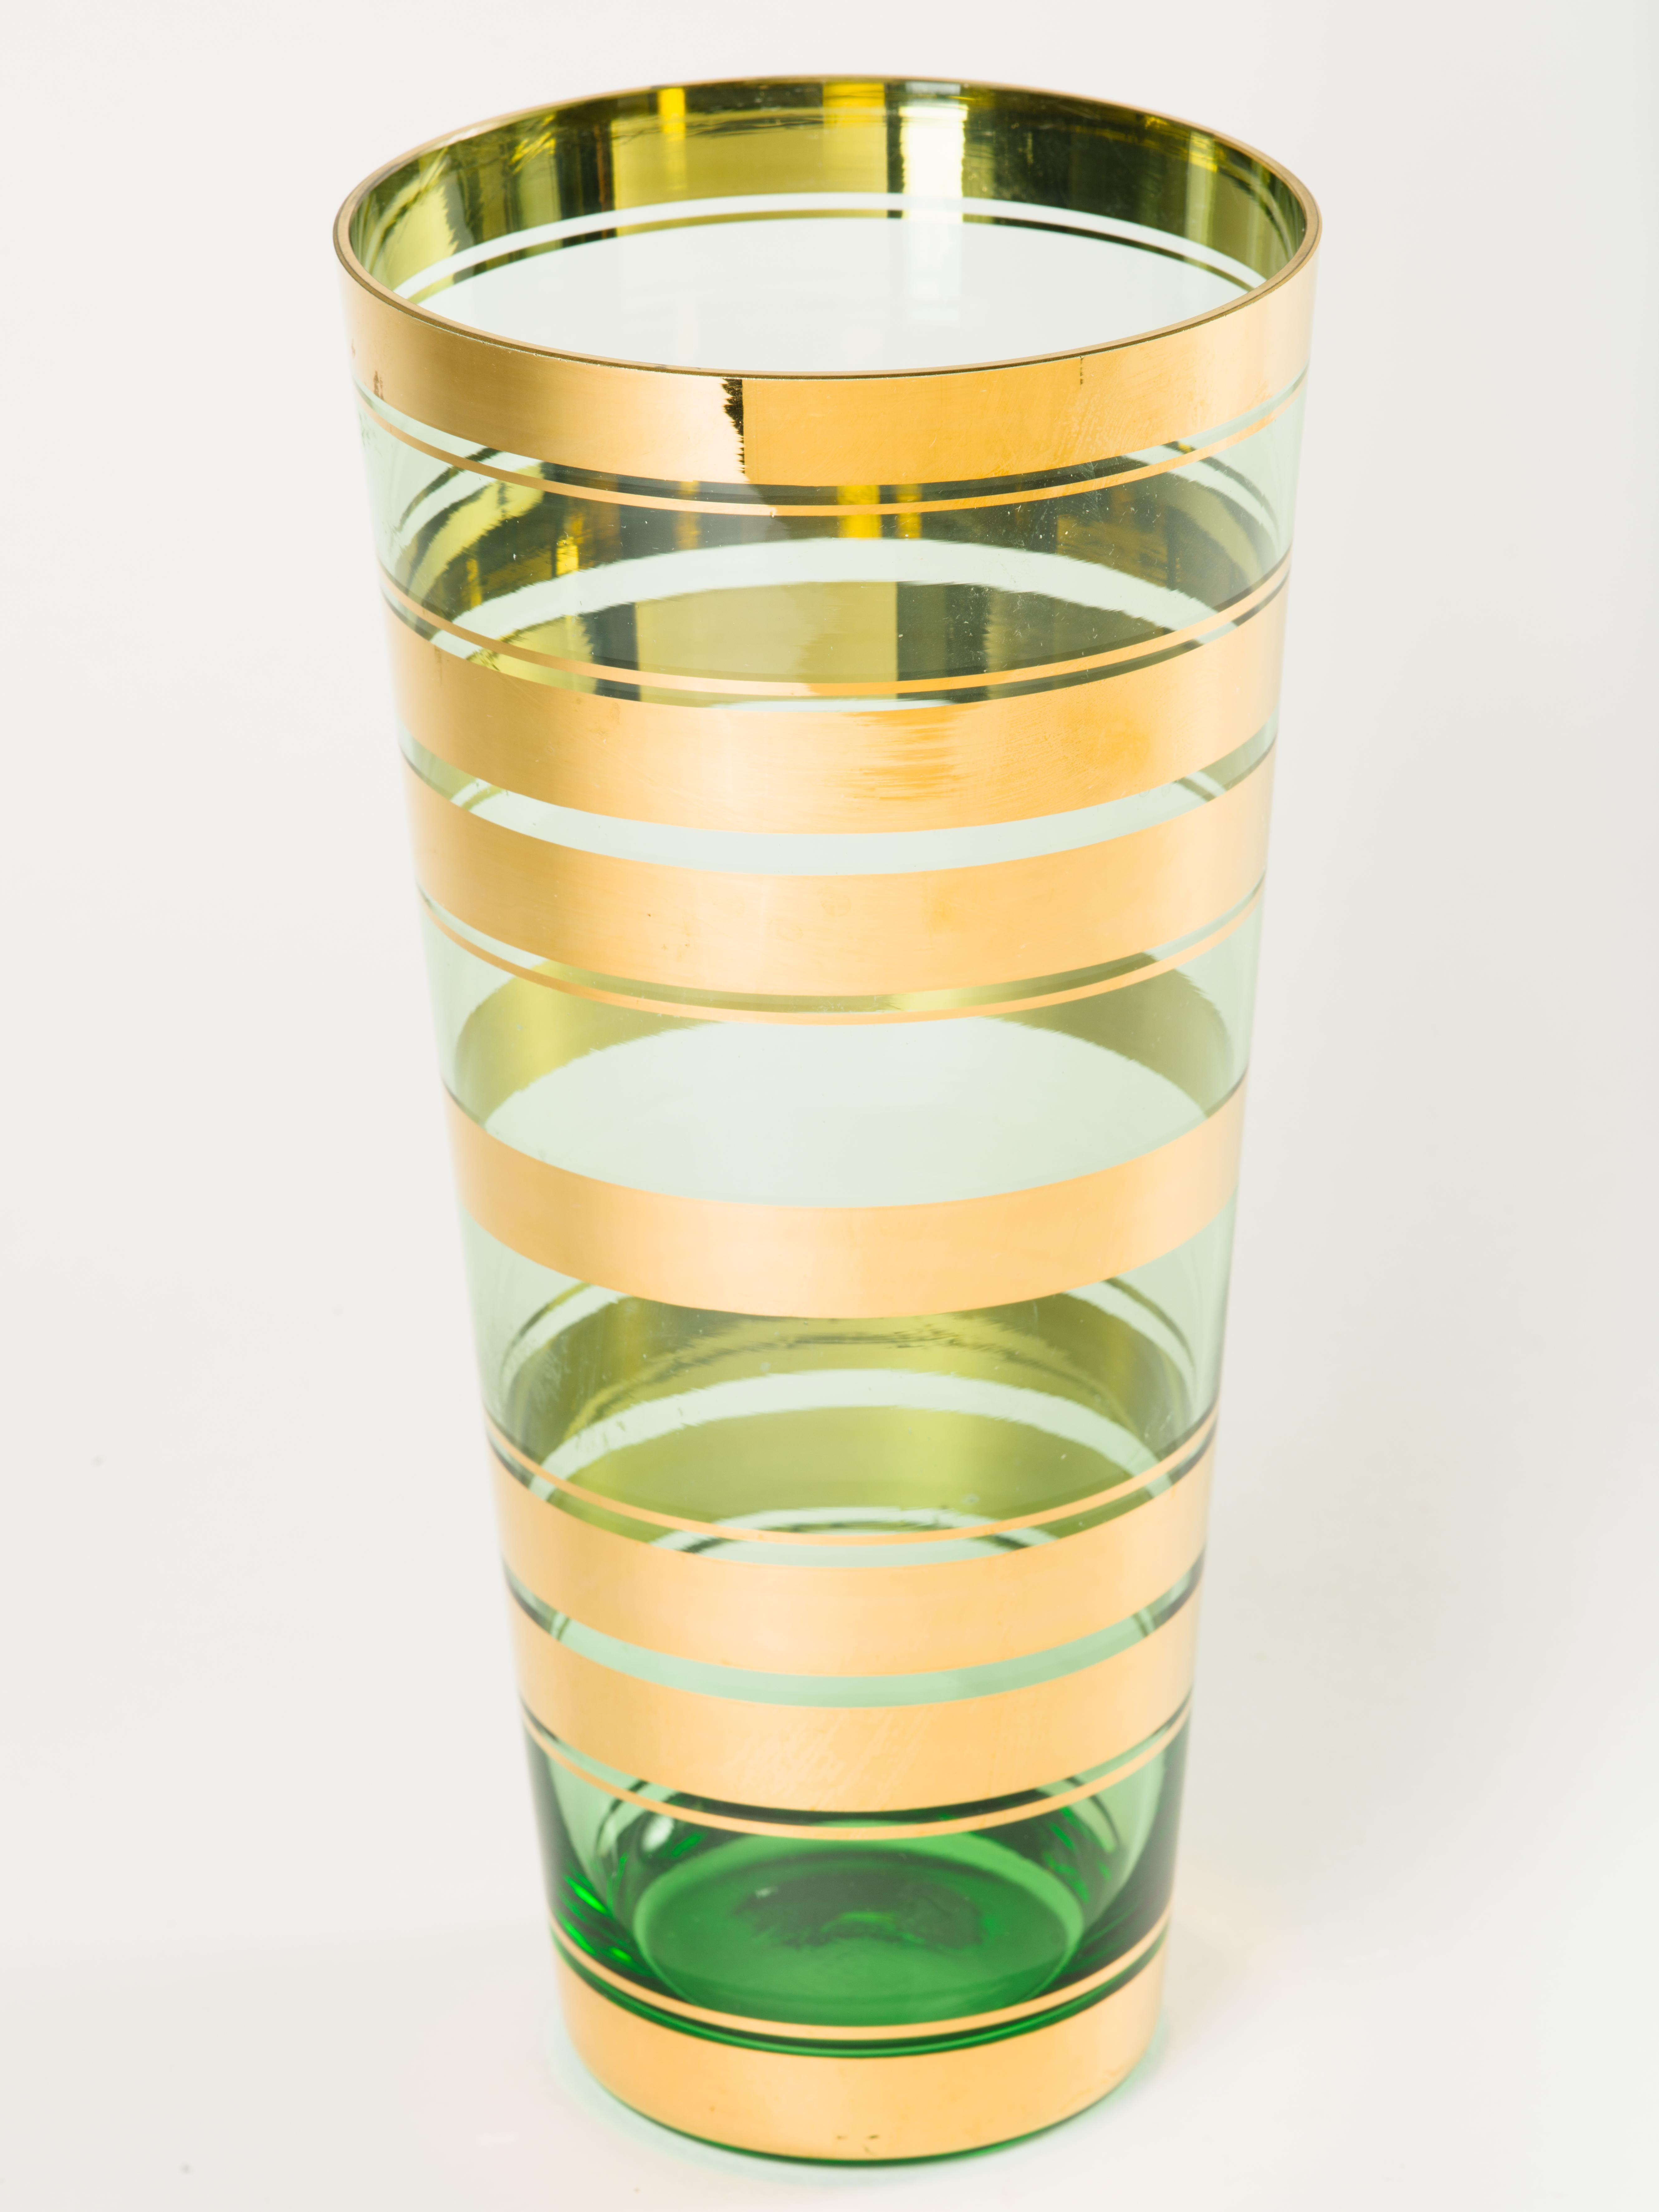 Vintage Czech Republic handblown art glass vase with tapered form. Features beautiful translucent green glass with 24-karat yellow gold rim details.